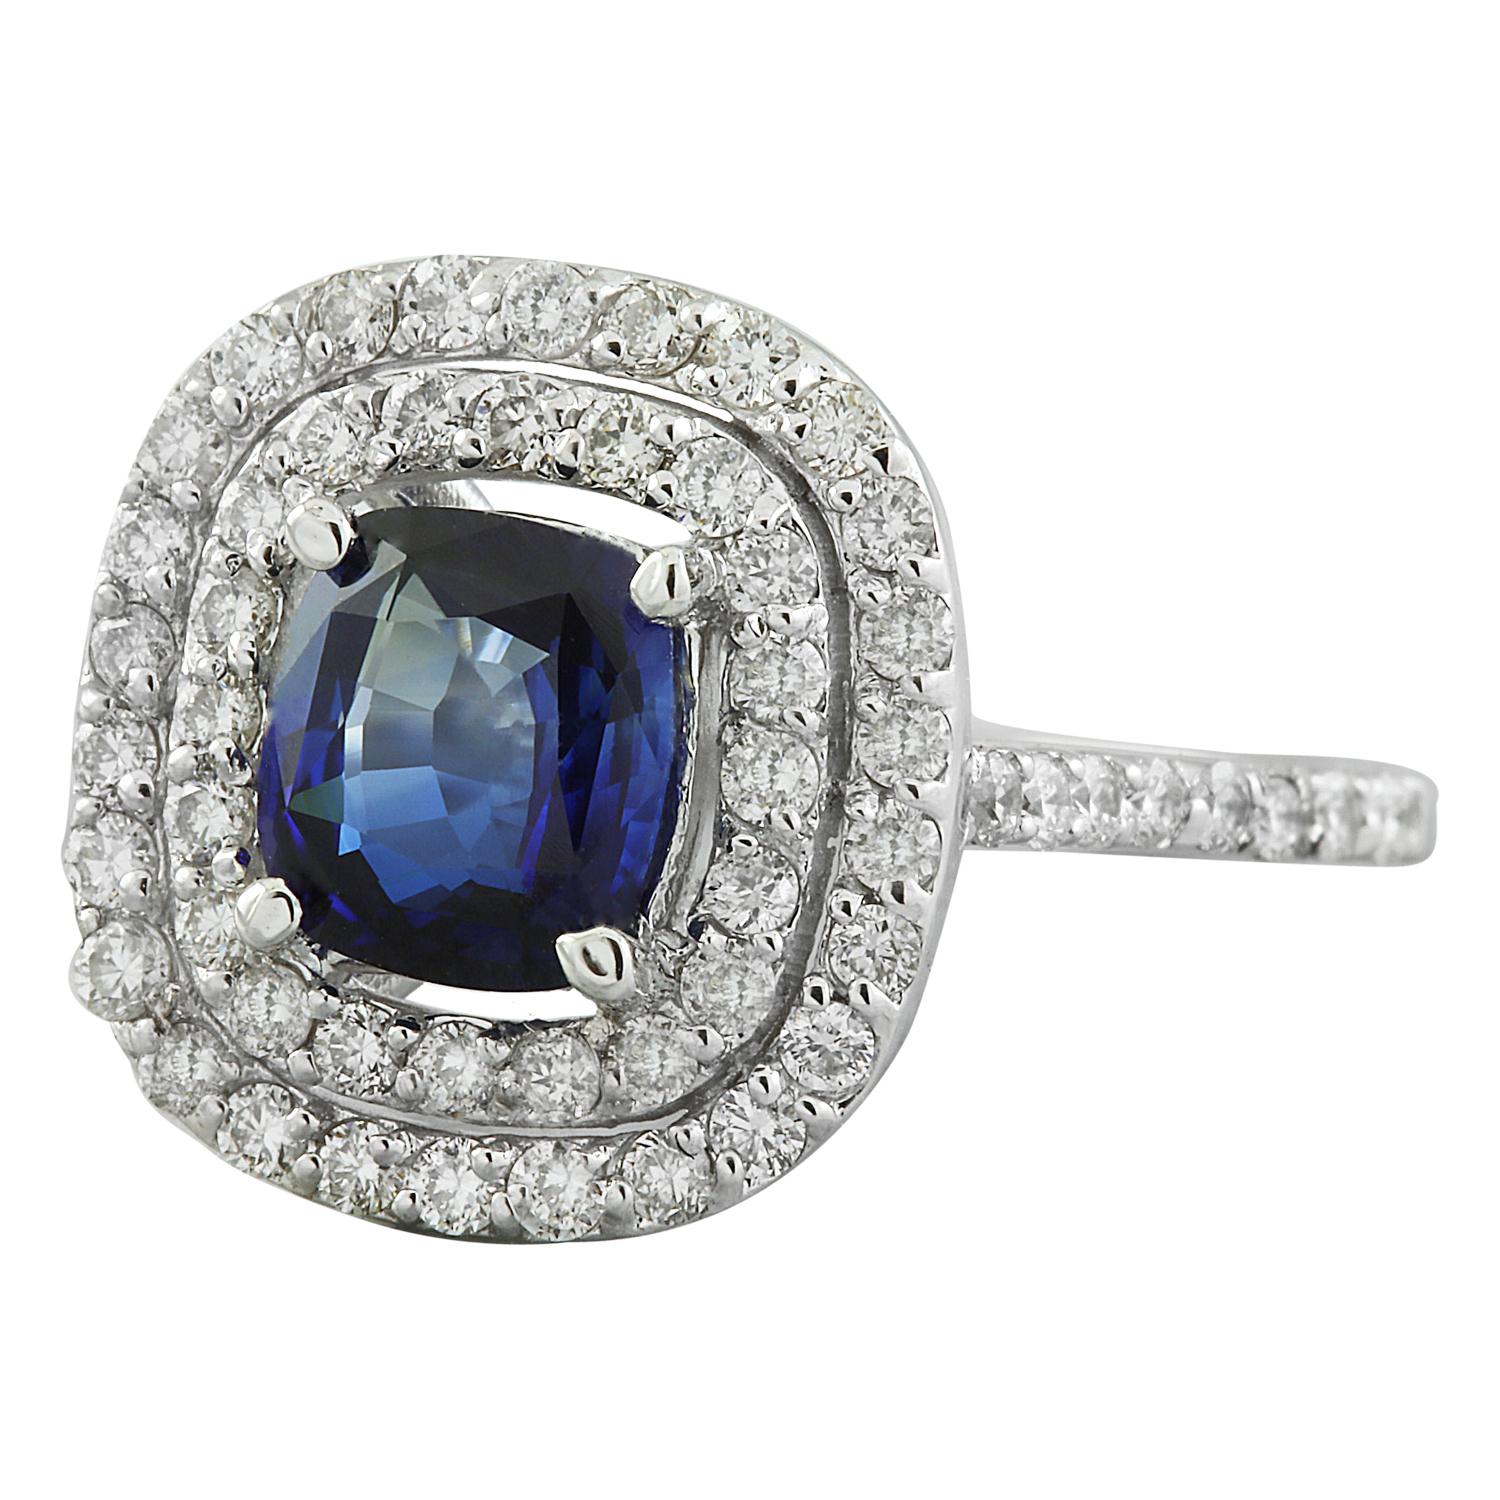 2.23 Carat Natural Sapphire 14 Karat Solid White Gold Diamond Ring
Stamped: 14K 
Total Ring Weight: 4.7 Grams 
Sapphire Weight: 1.23 Carat (6.50x6.50 Millimeters) 
Diamond Weight: 1.00 carat (F-G Color, VS2-SI1 Clarity )
Quantity: 62
Face Measures: